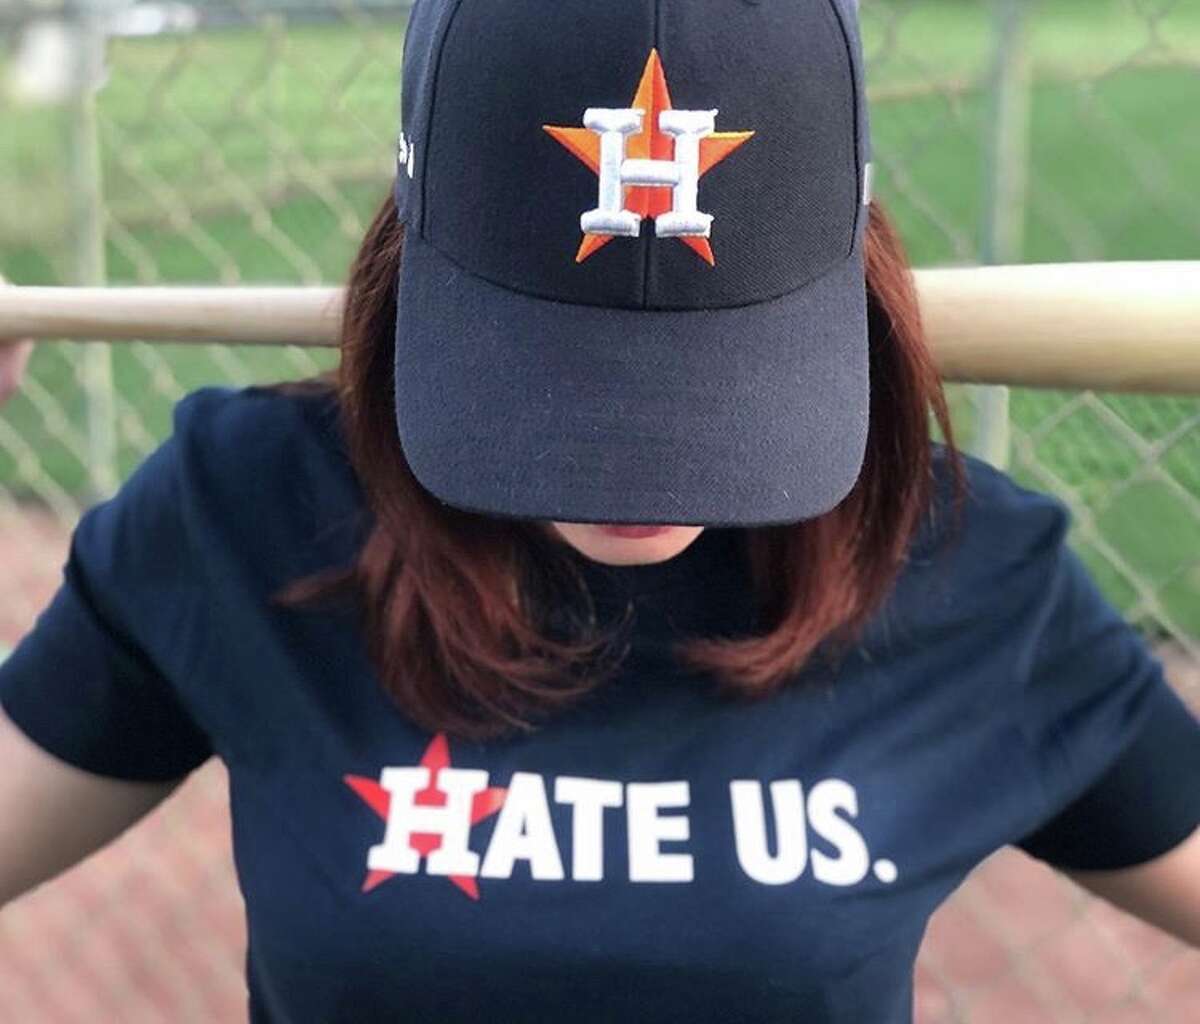 Houston Astros "Hate Us" shirt from creators Nick and Chelsea Drago.